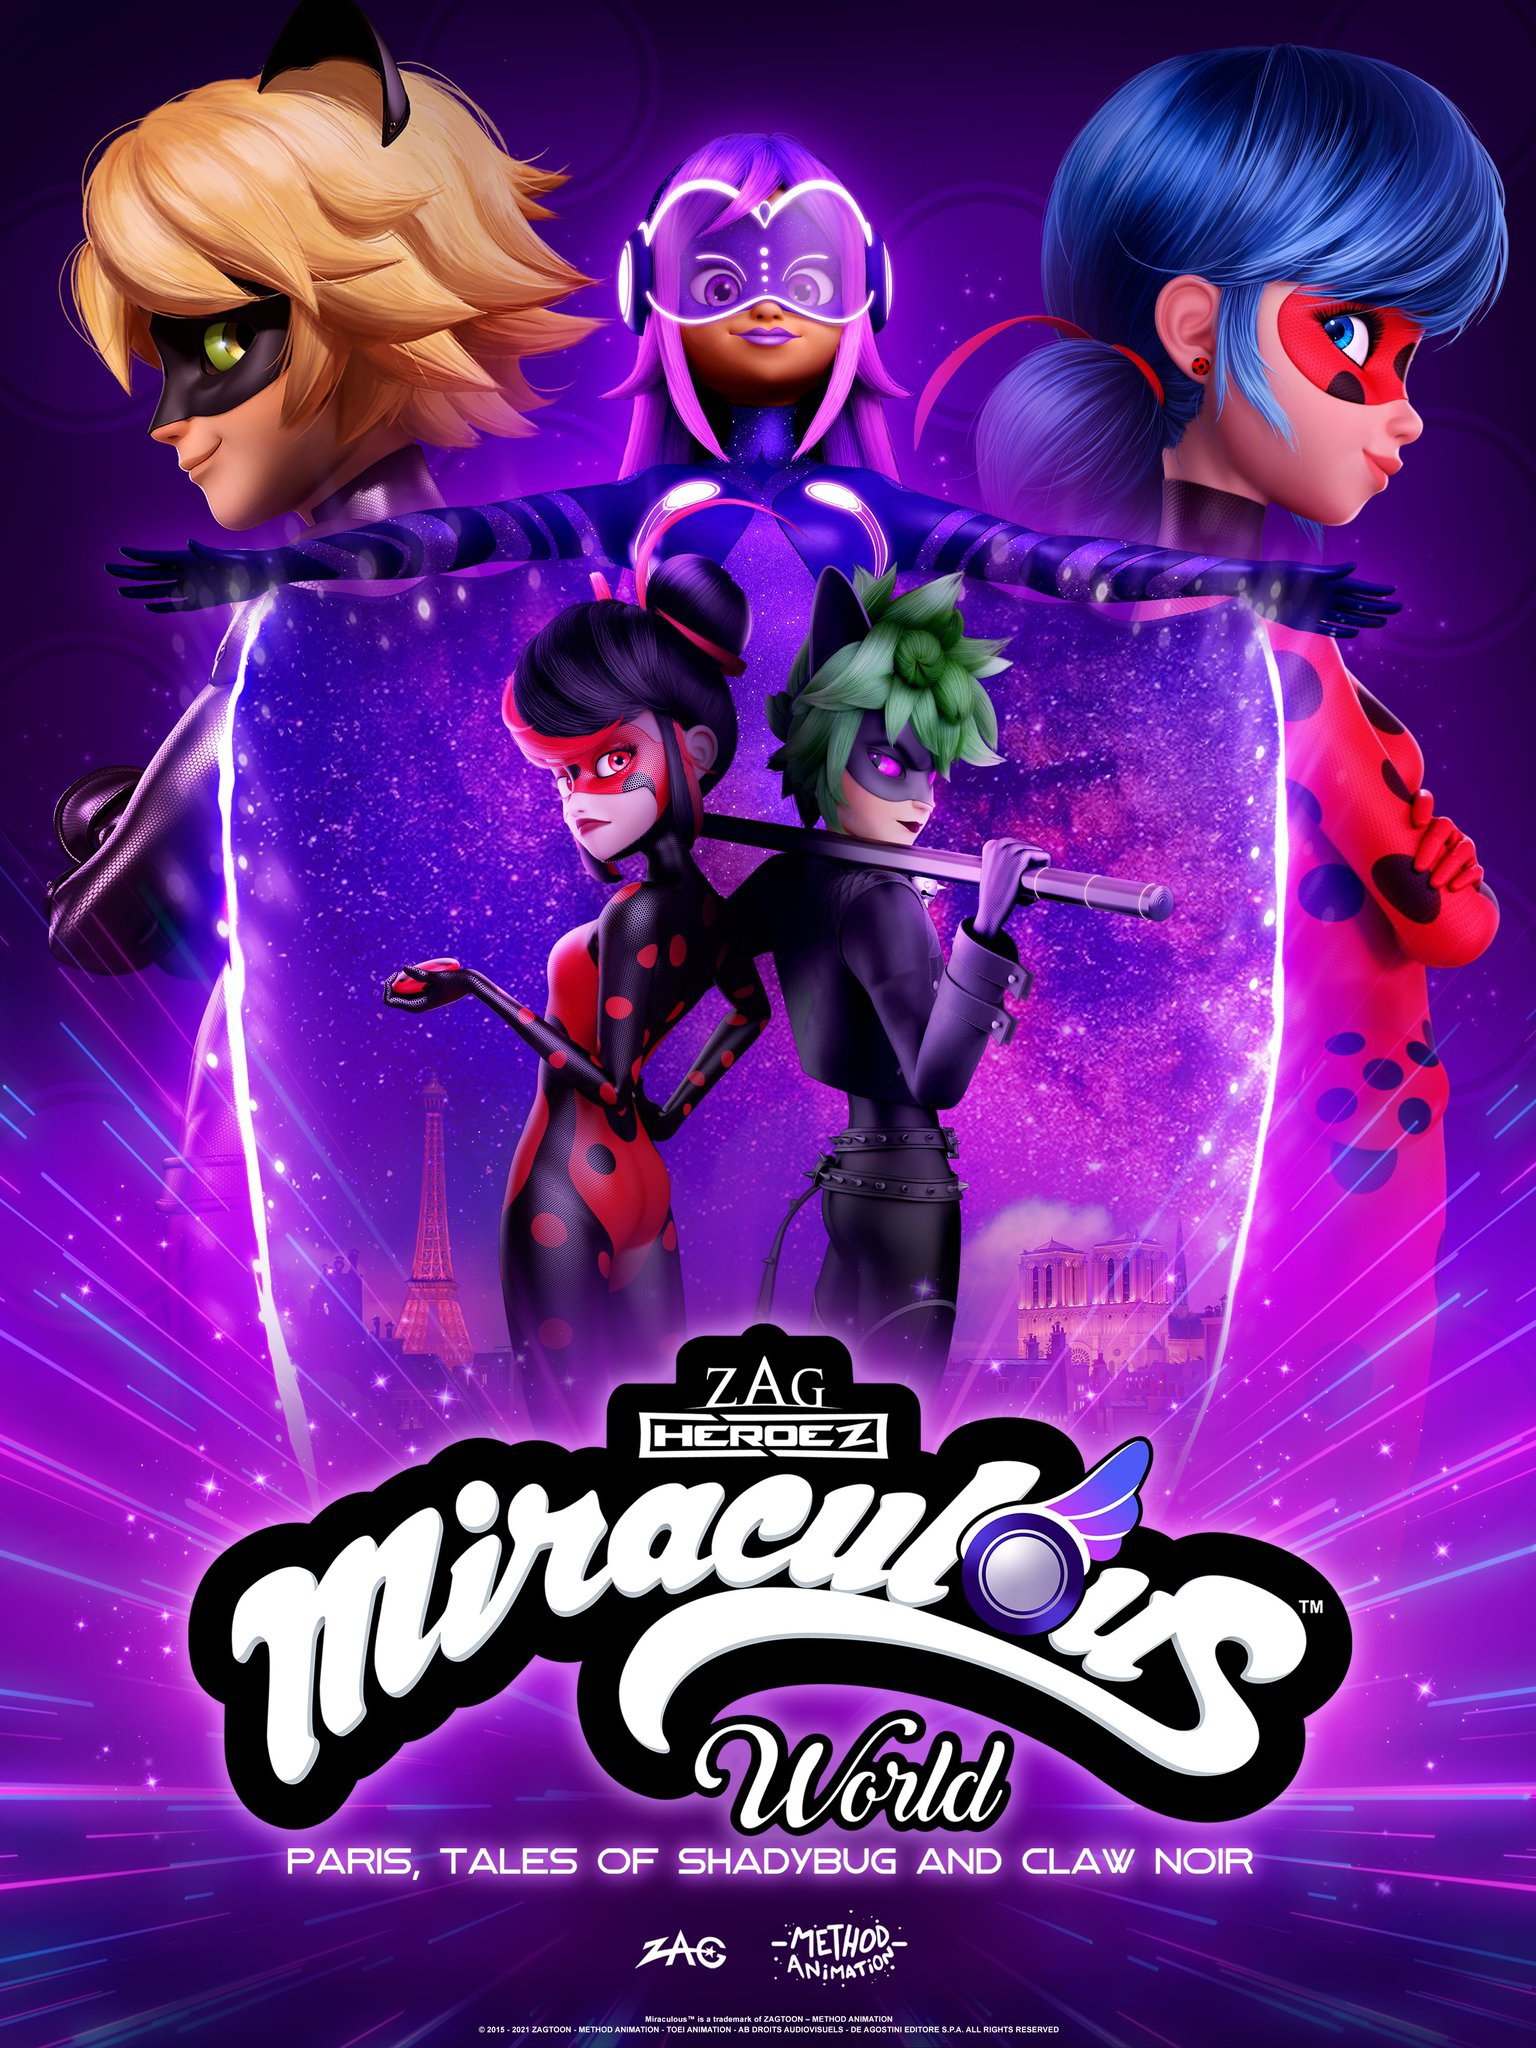 Miraculous News World 🐞 on X: 🐞🇫🇷: Get to be the first ones to see the  Miraculous: The Film in France! The film will be presented to you on  #GrandRex Paris starting